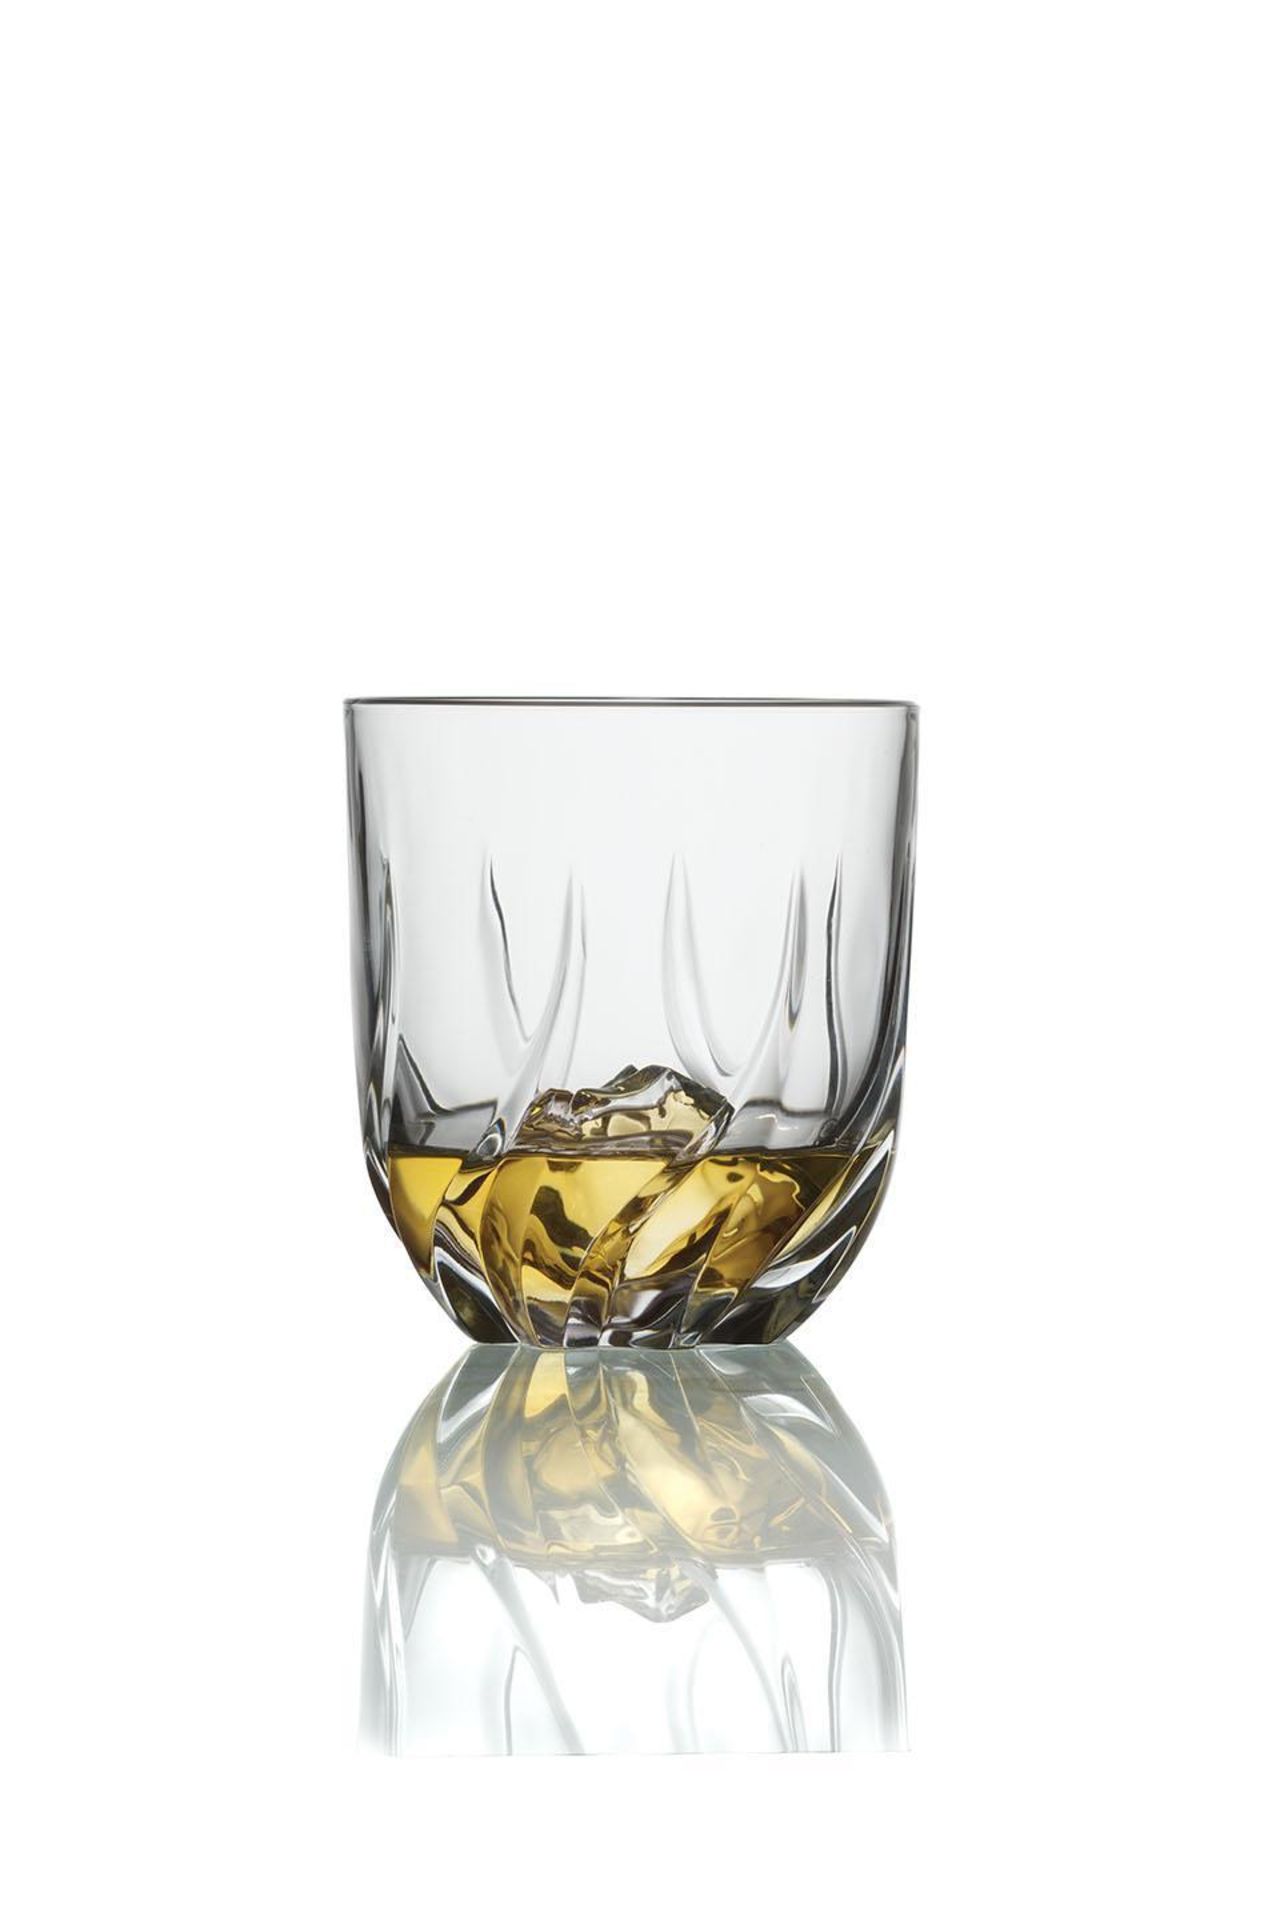 V *TRADE QTY* Brand New RCR Twist Whiskey Glasses 33cl - Made In Italy X 4 YOUR BID PRICE TO BE